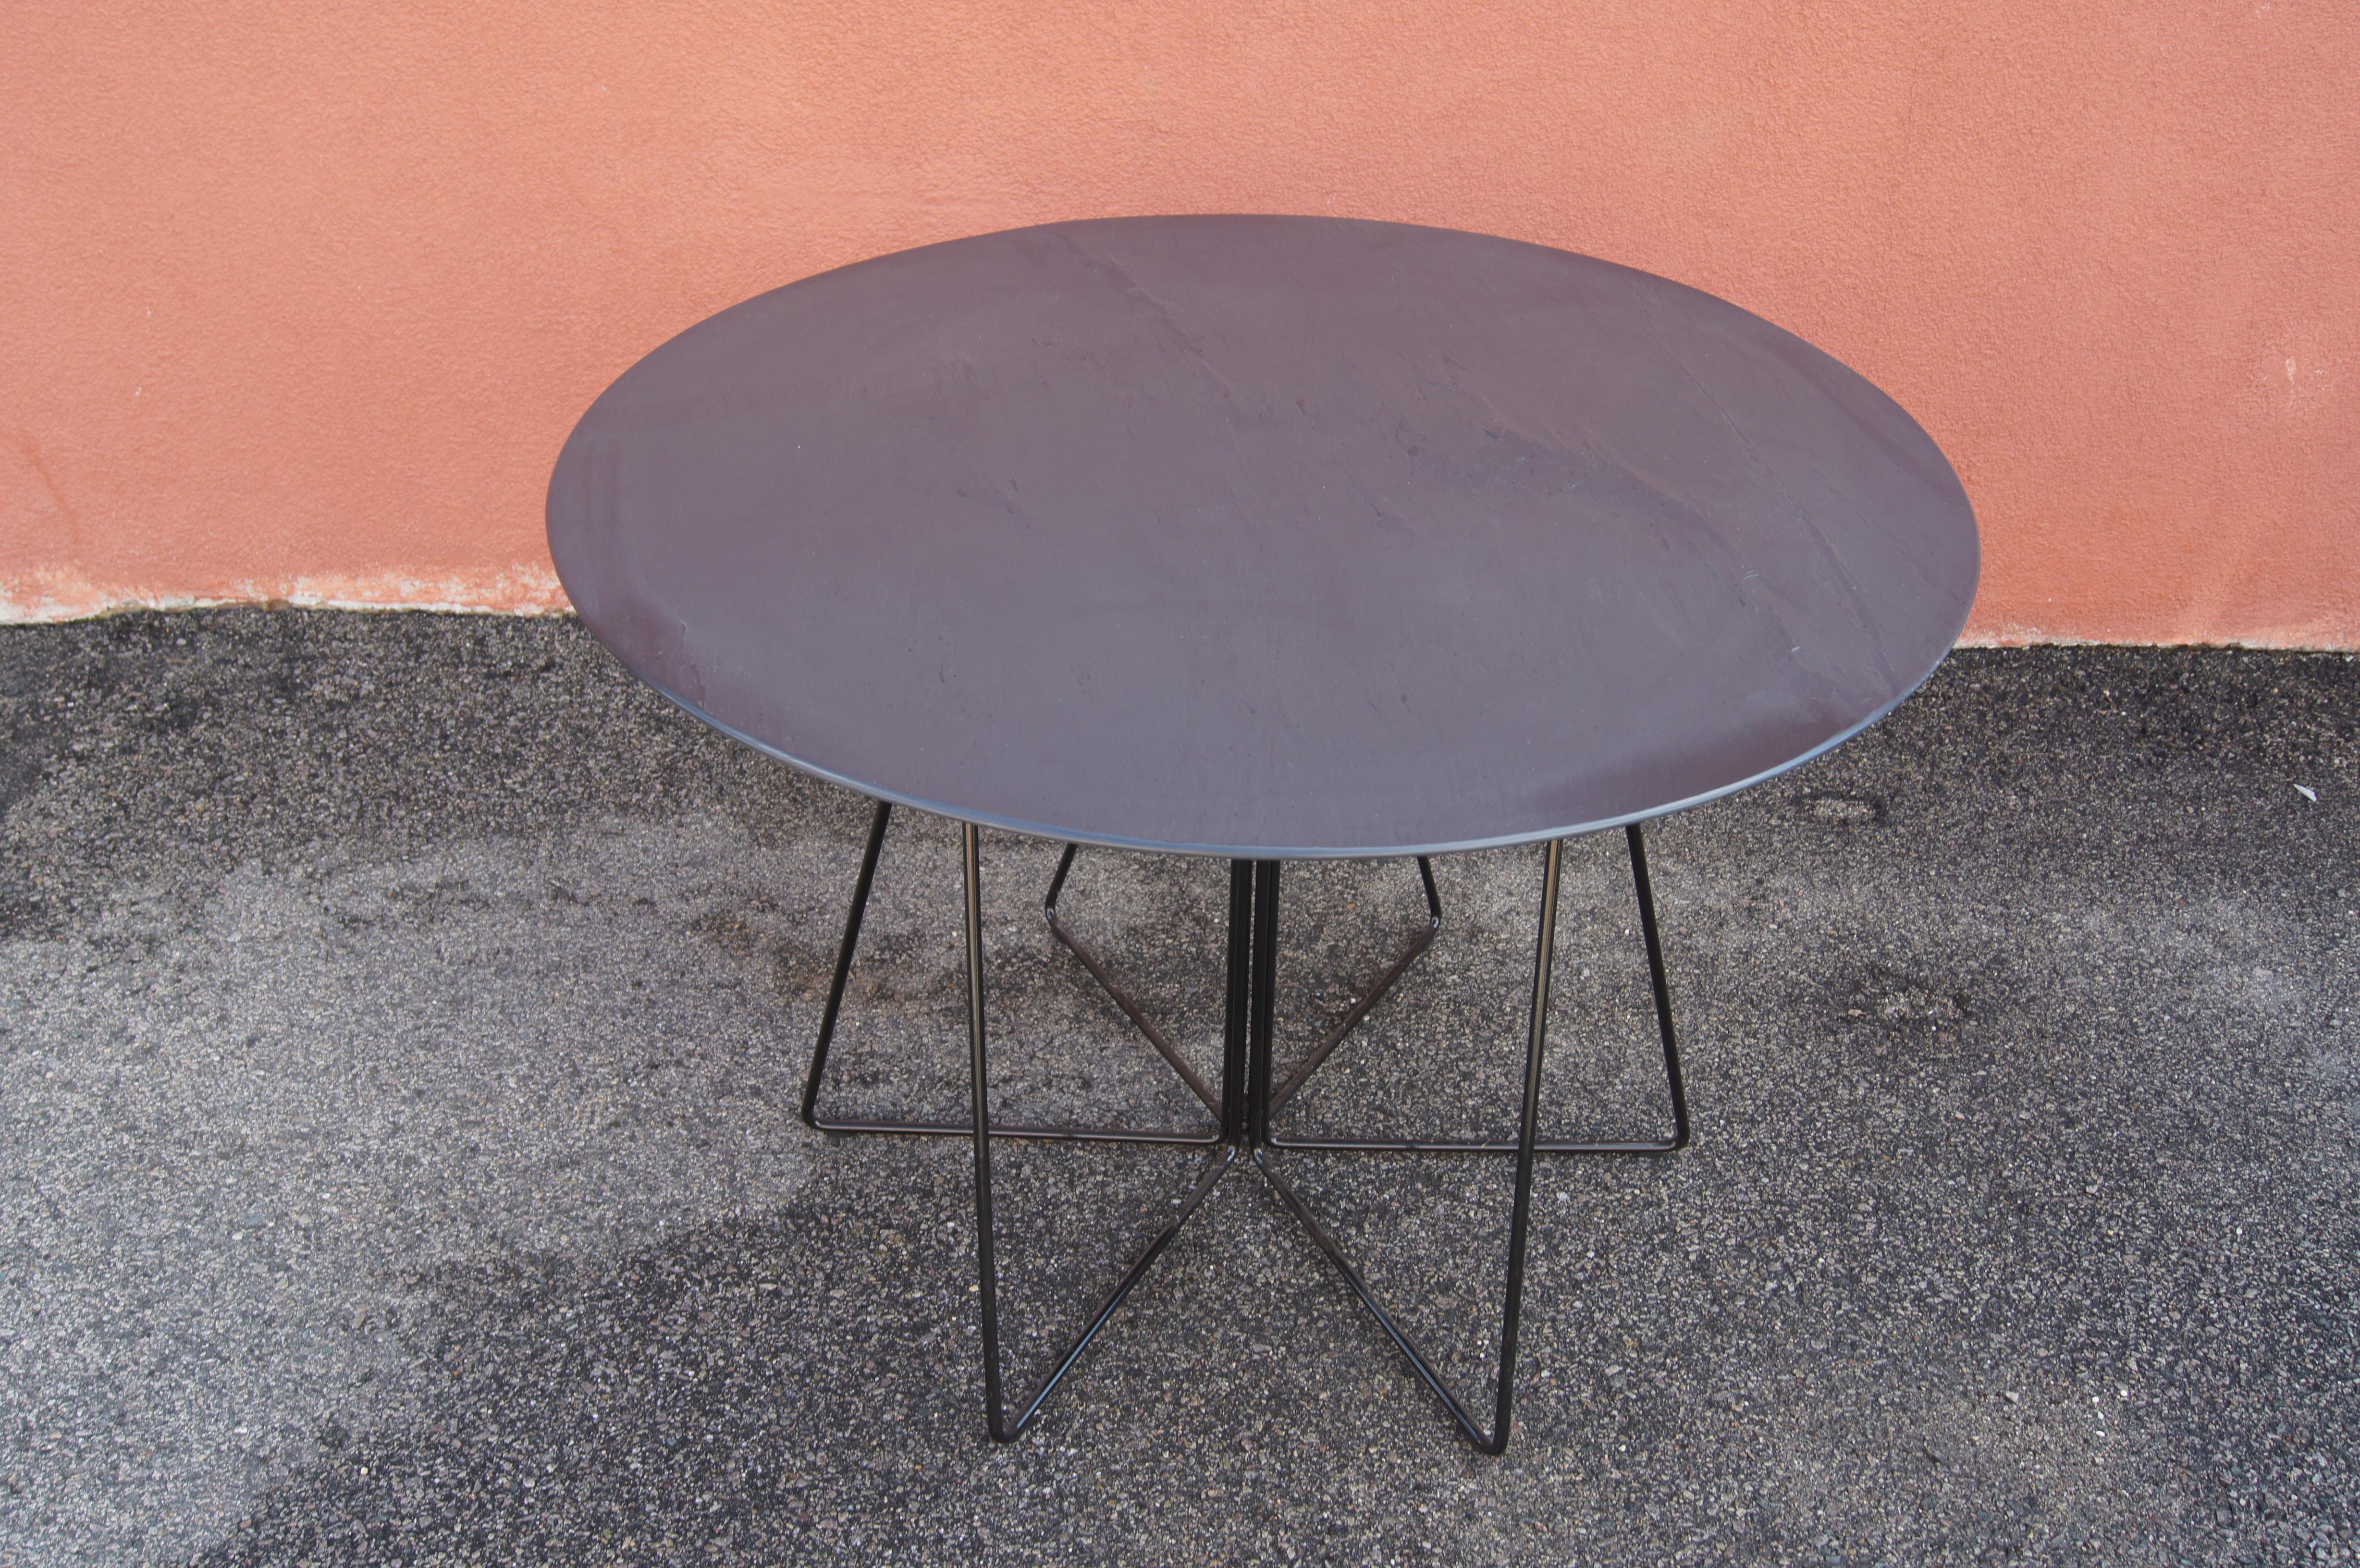 Slate PaperClip Cafe Table by Lella and Massimo Vignelli for Knoll In Good Condition For Sale In Dorchester, MA